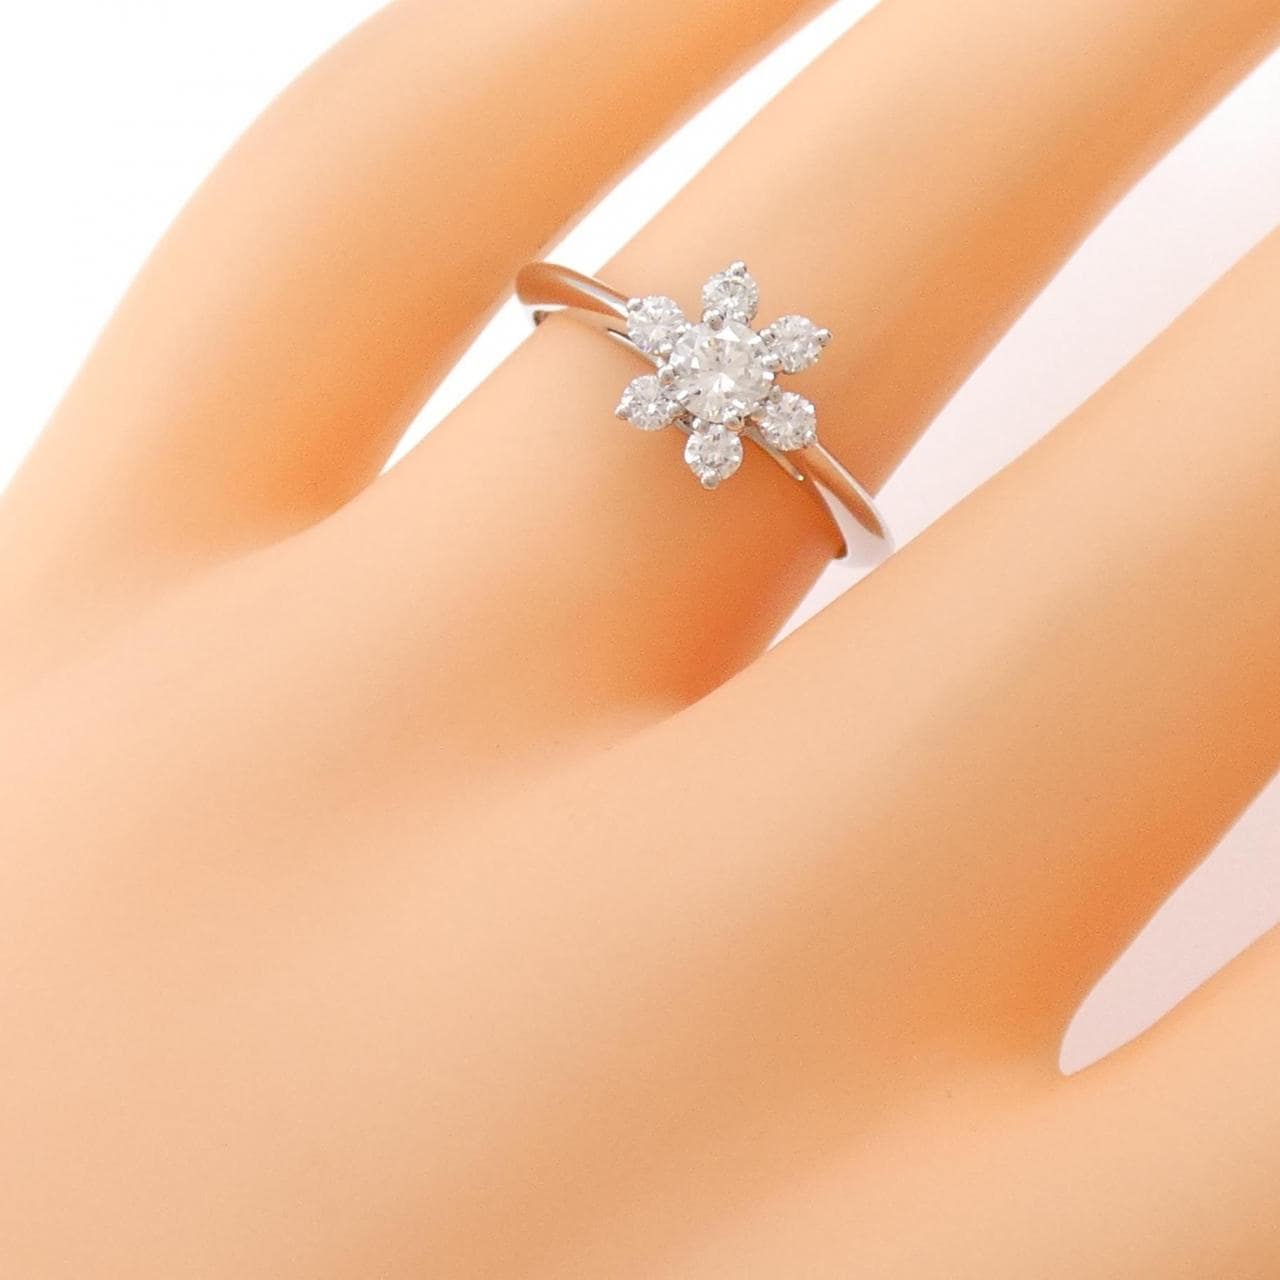 TIFFANY buttercup ring